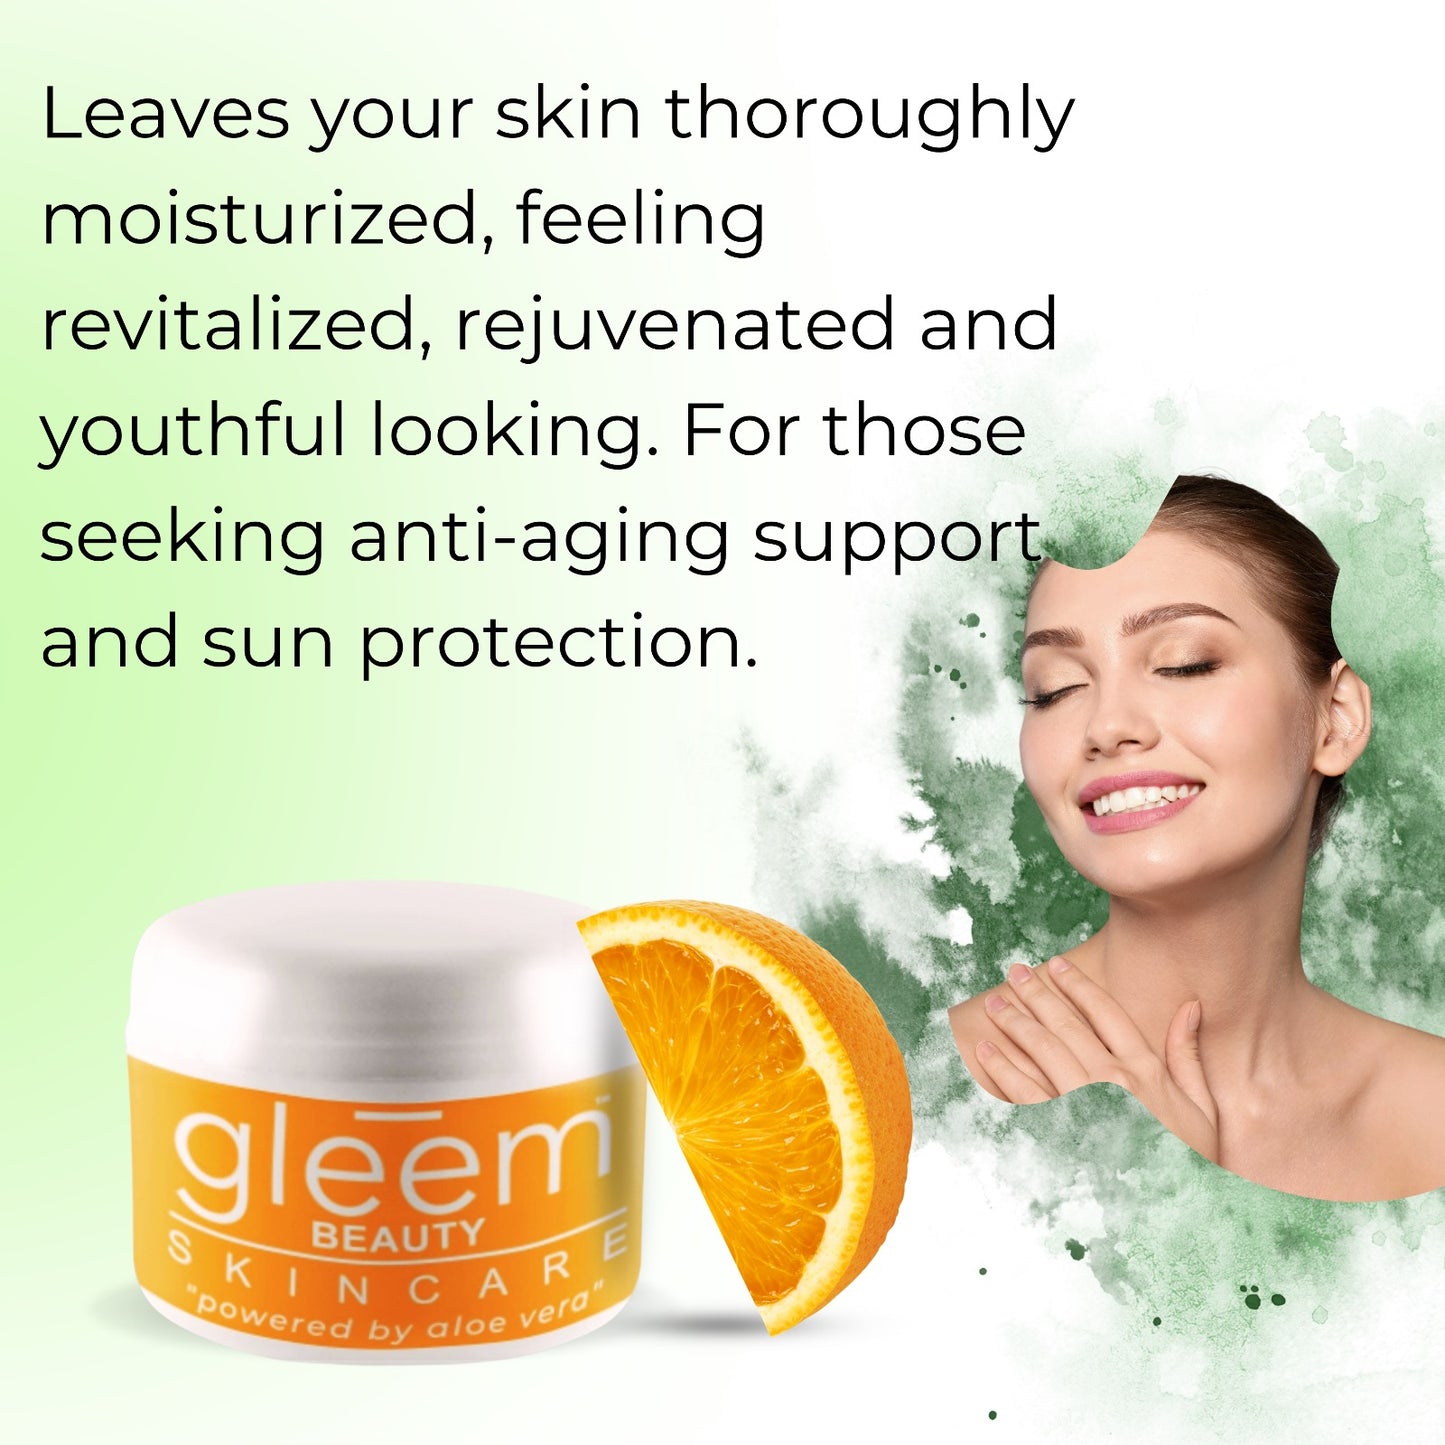 One and done day moisturizer leaves your skin moisturized, revitalized, rejuvenated and youthful looking.